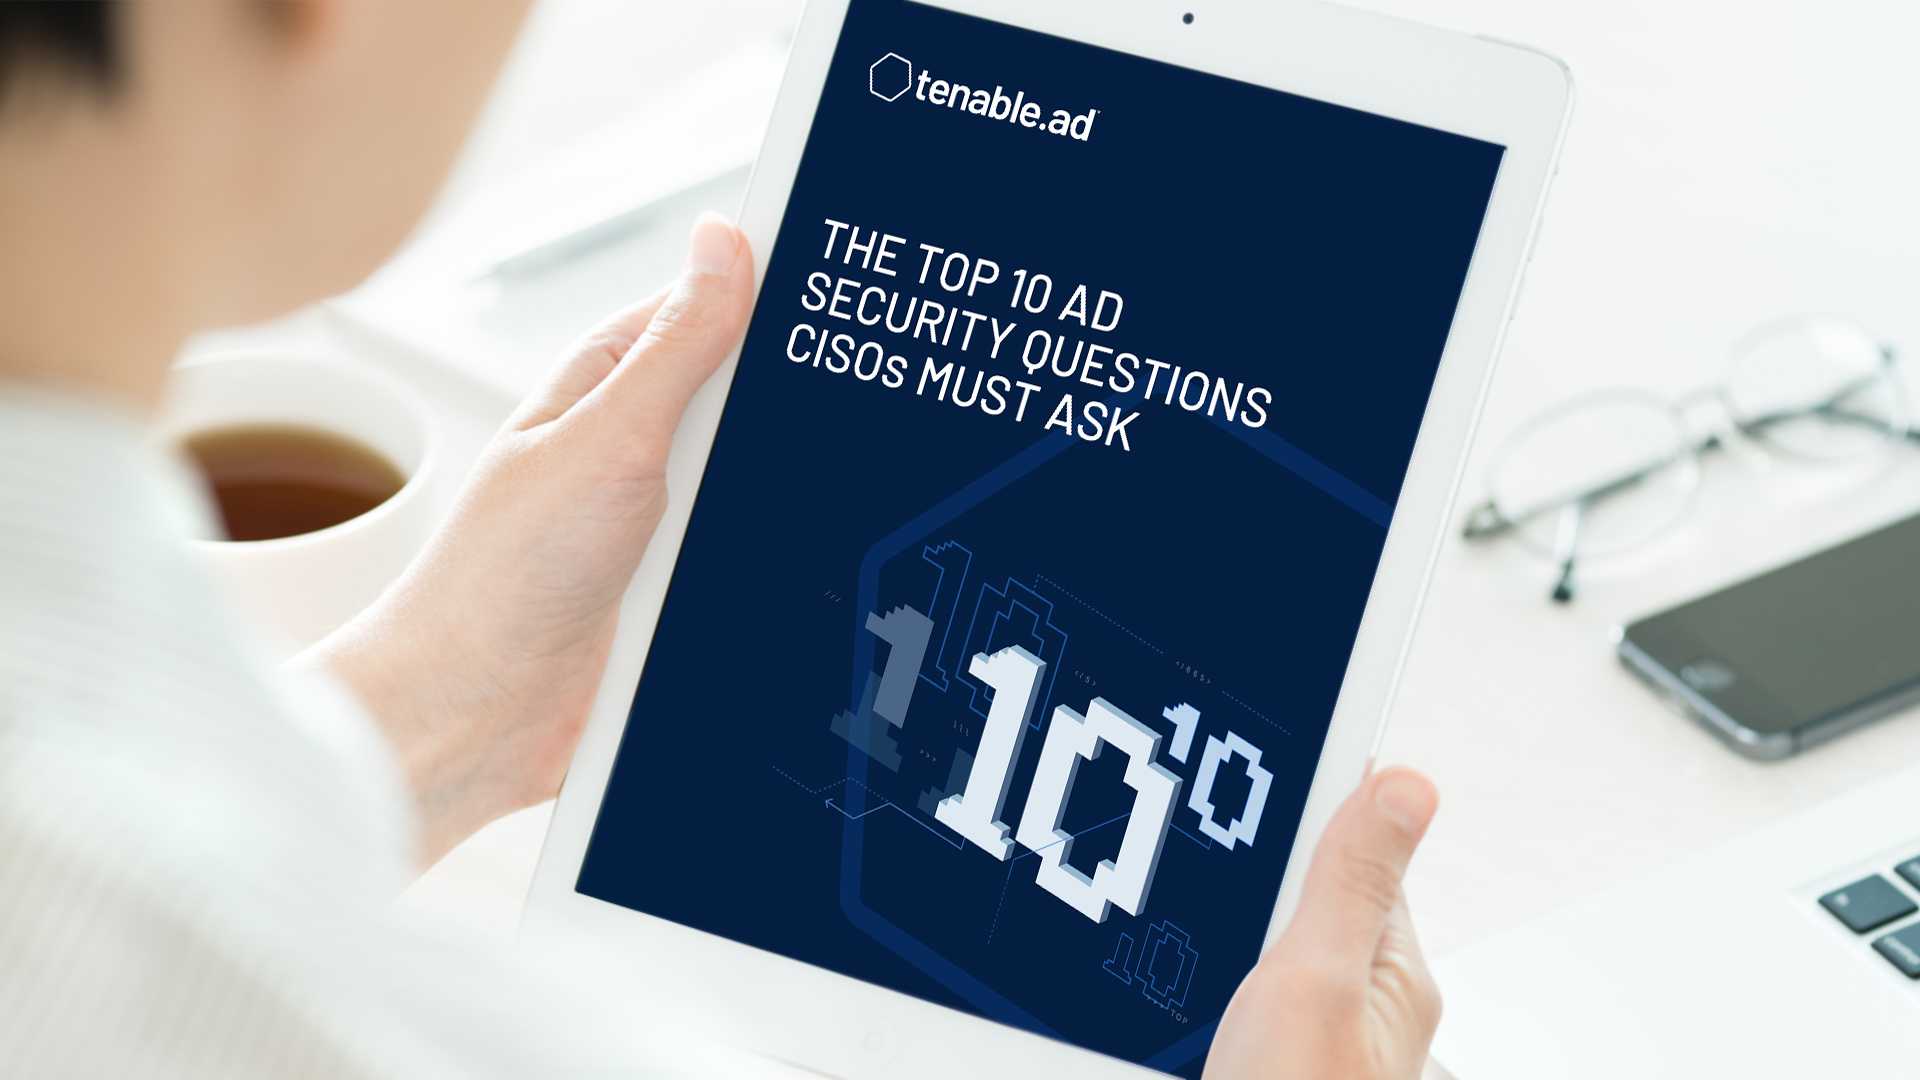 Tips: Top 10 AD security questions CISOs must ask